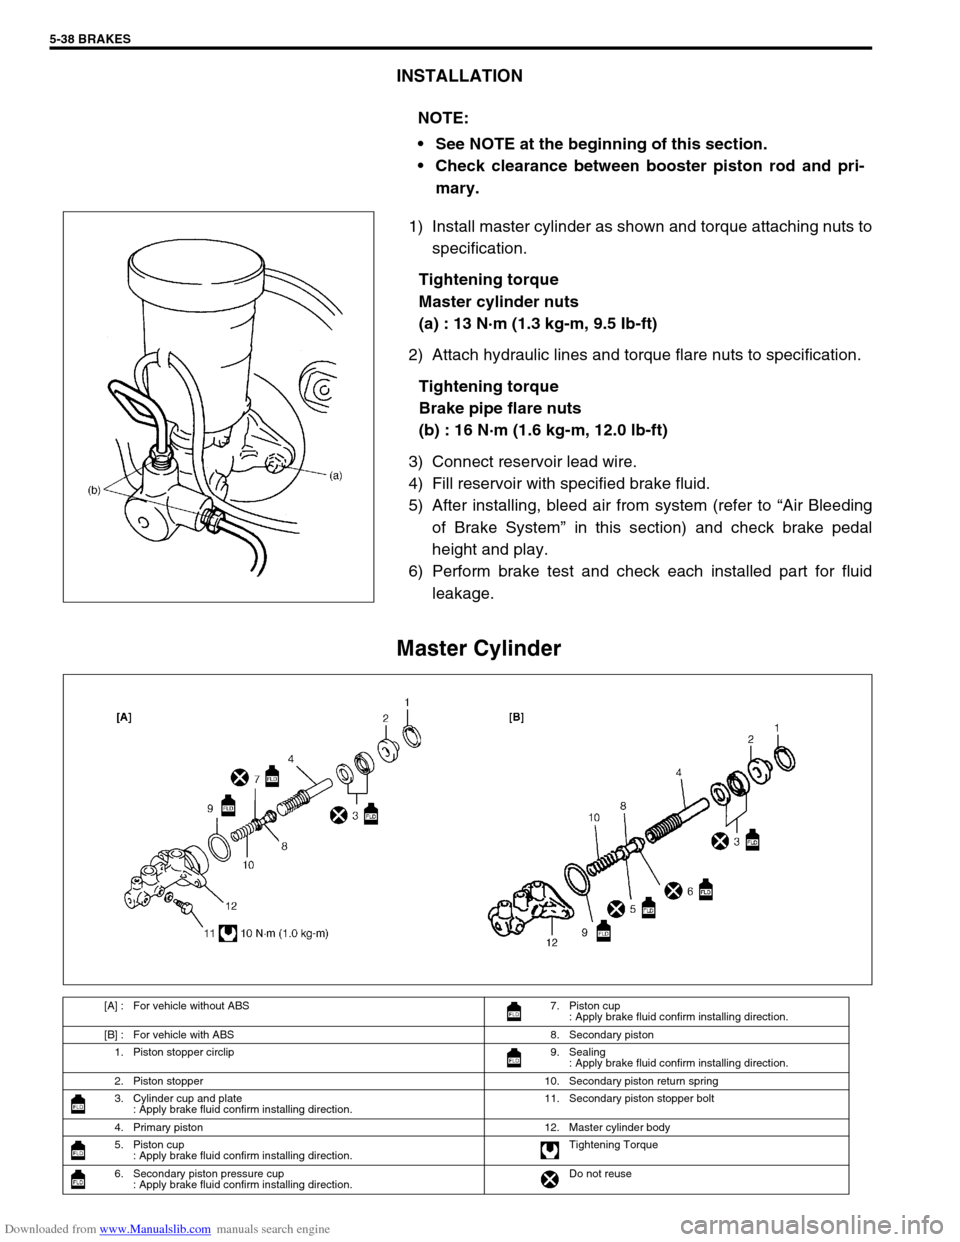 SUZUKI JIMNY 2005 3.G Service Workshop Manual Downloaded from www.Manualslib.com manuals search engine 5-38 BRAKES
INSTALLATION
1) Install master cylinder as shown and torque attaching nuts to
specification.
Tightening torque
Master cylinder nuts